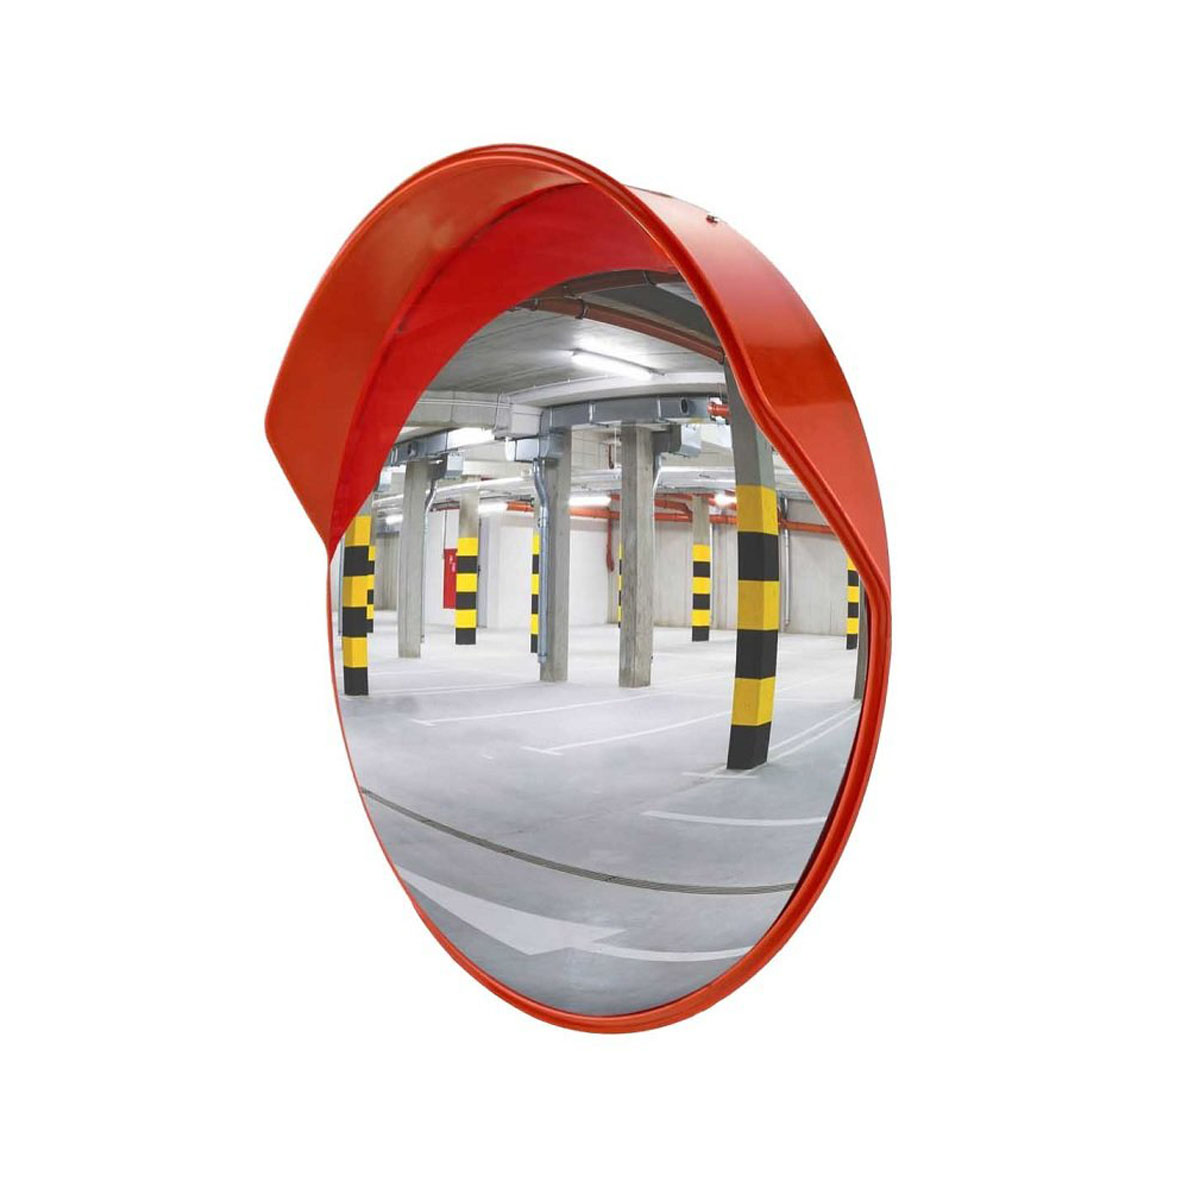 Buy Hooded Convex Mirror in Convex Traffic Safety Mirrors from Astrolift NZ